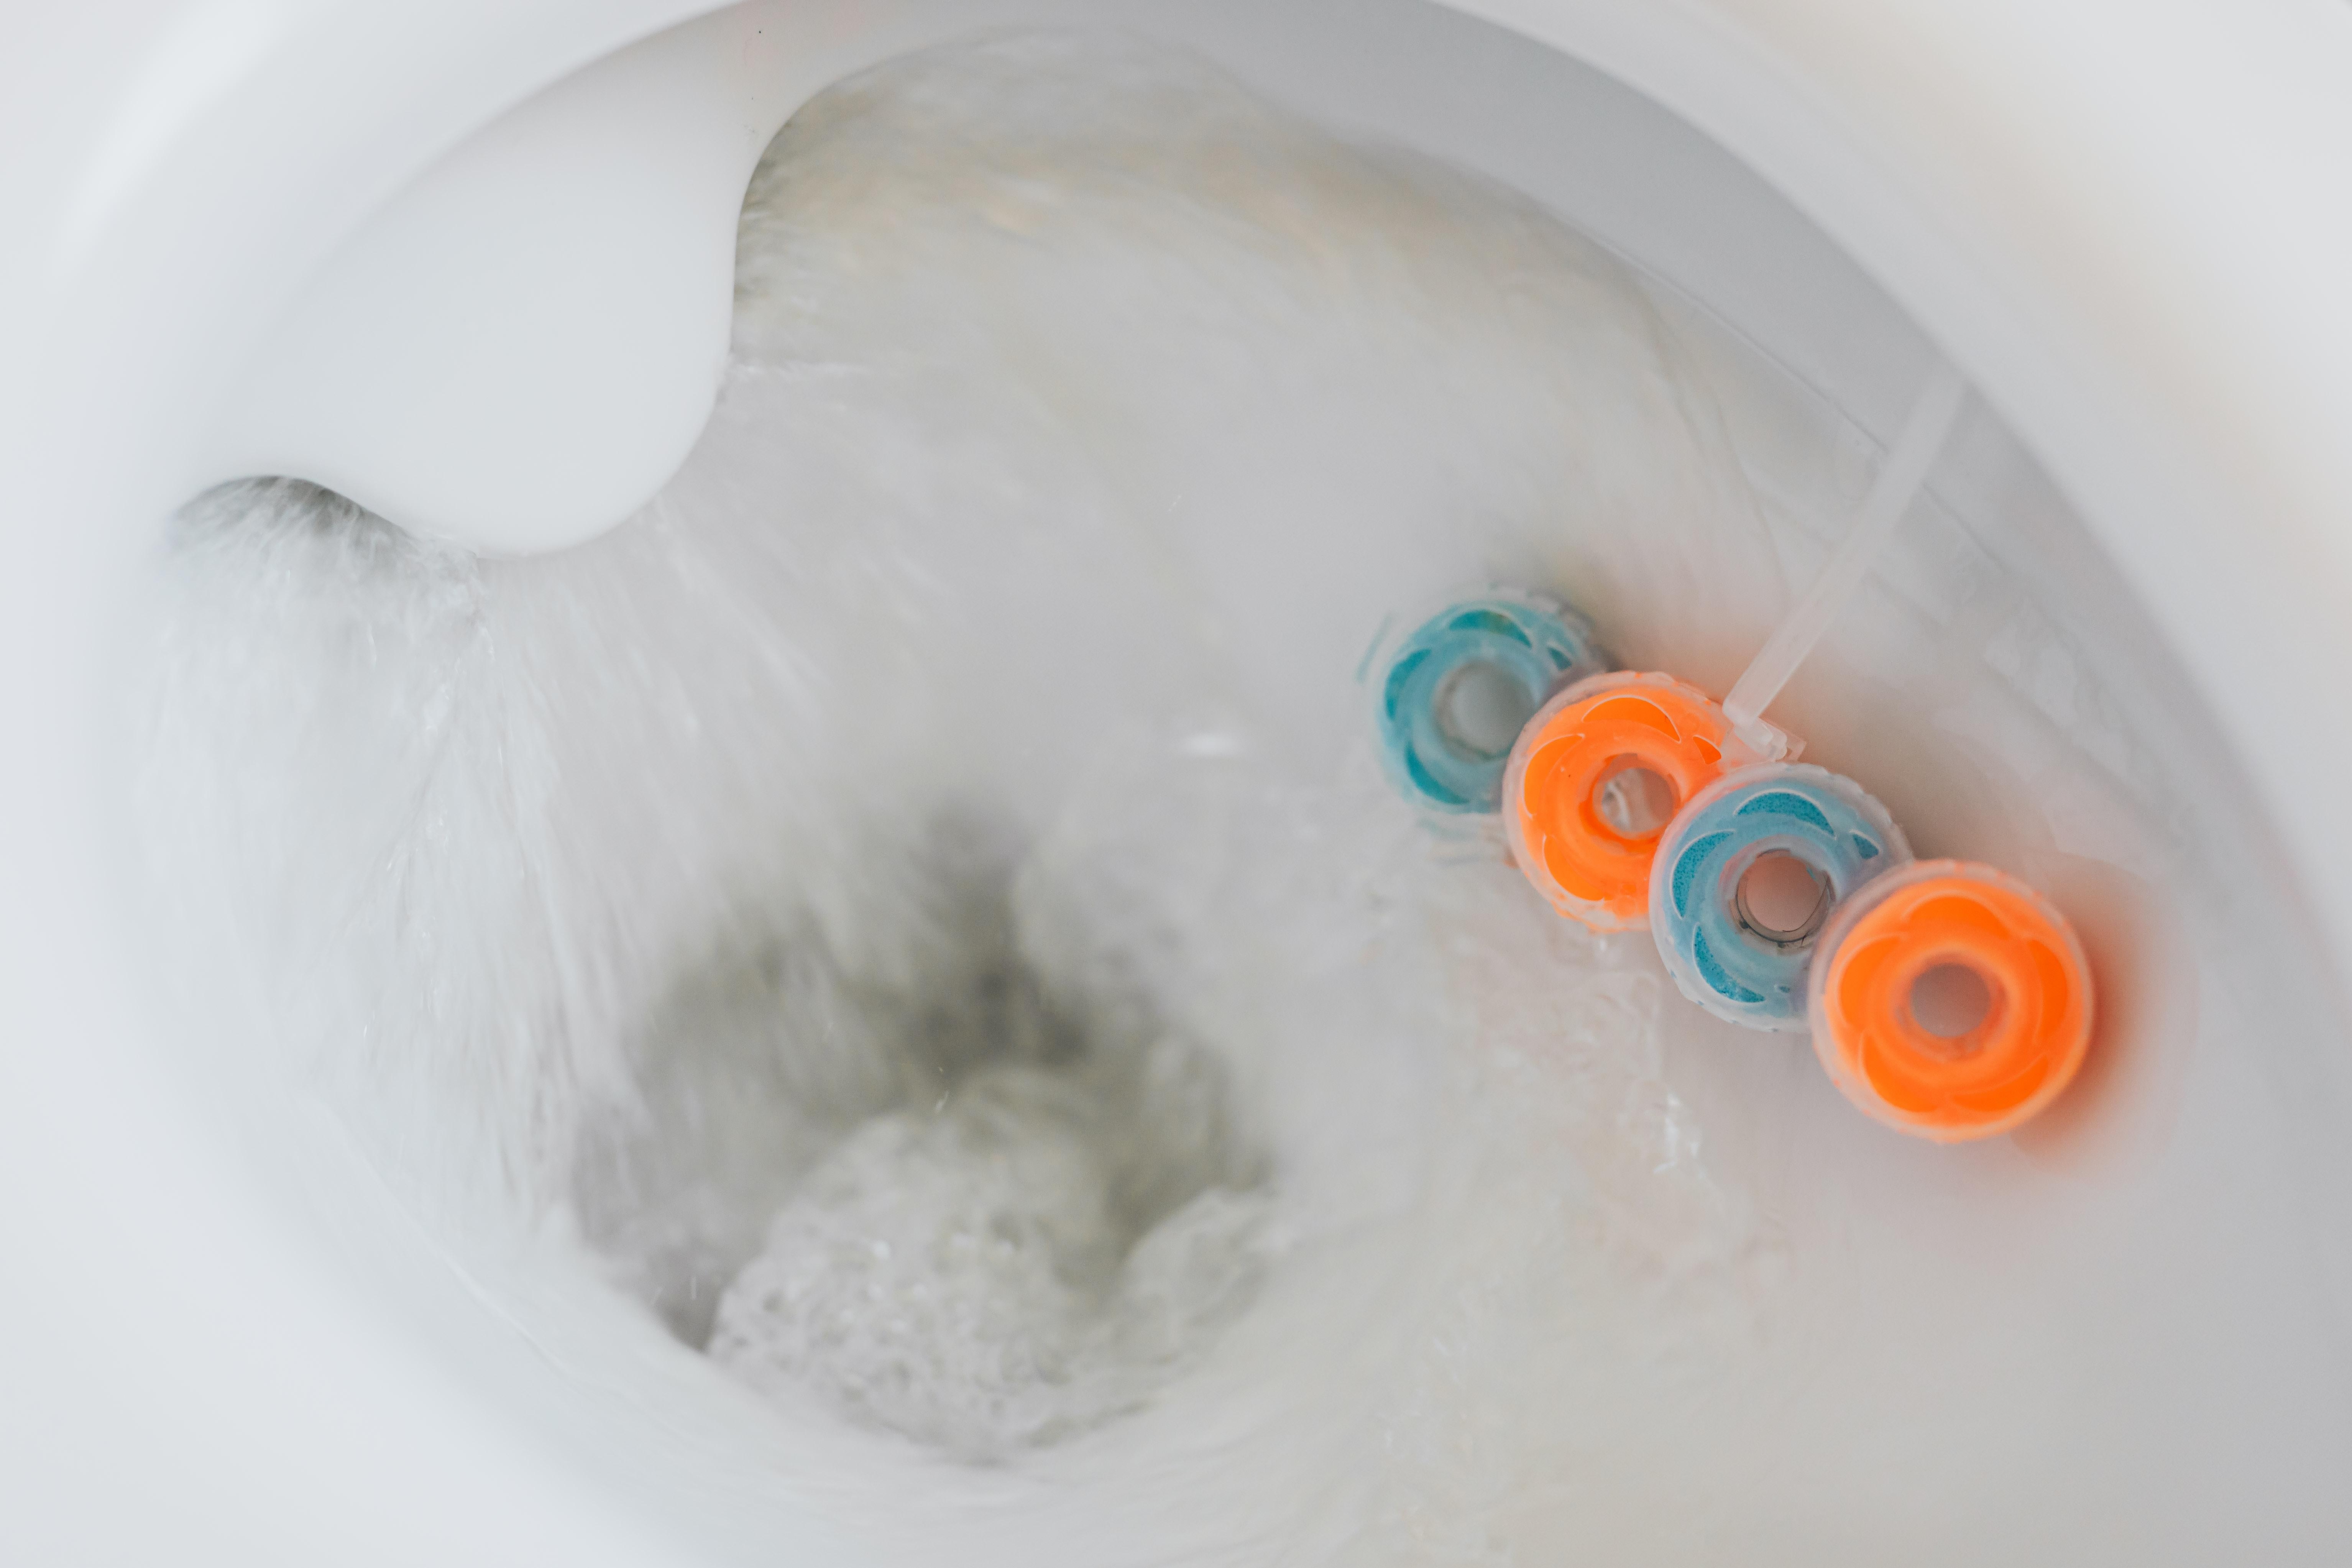  How To Dissolve Plastic In Toilet Bowl 